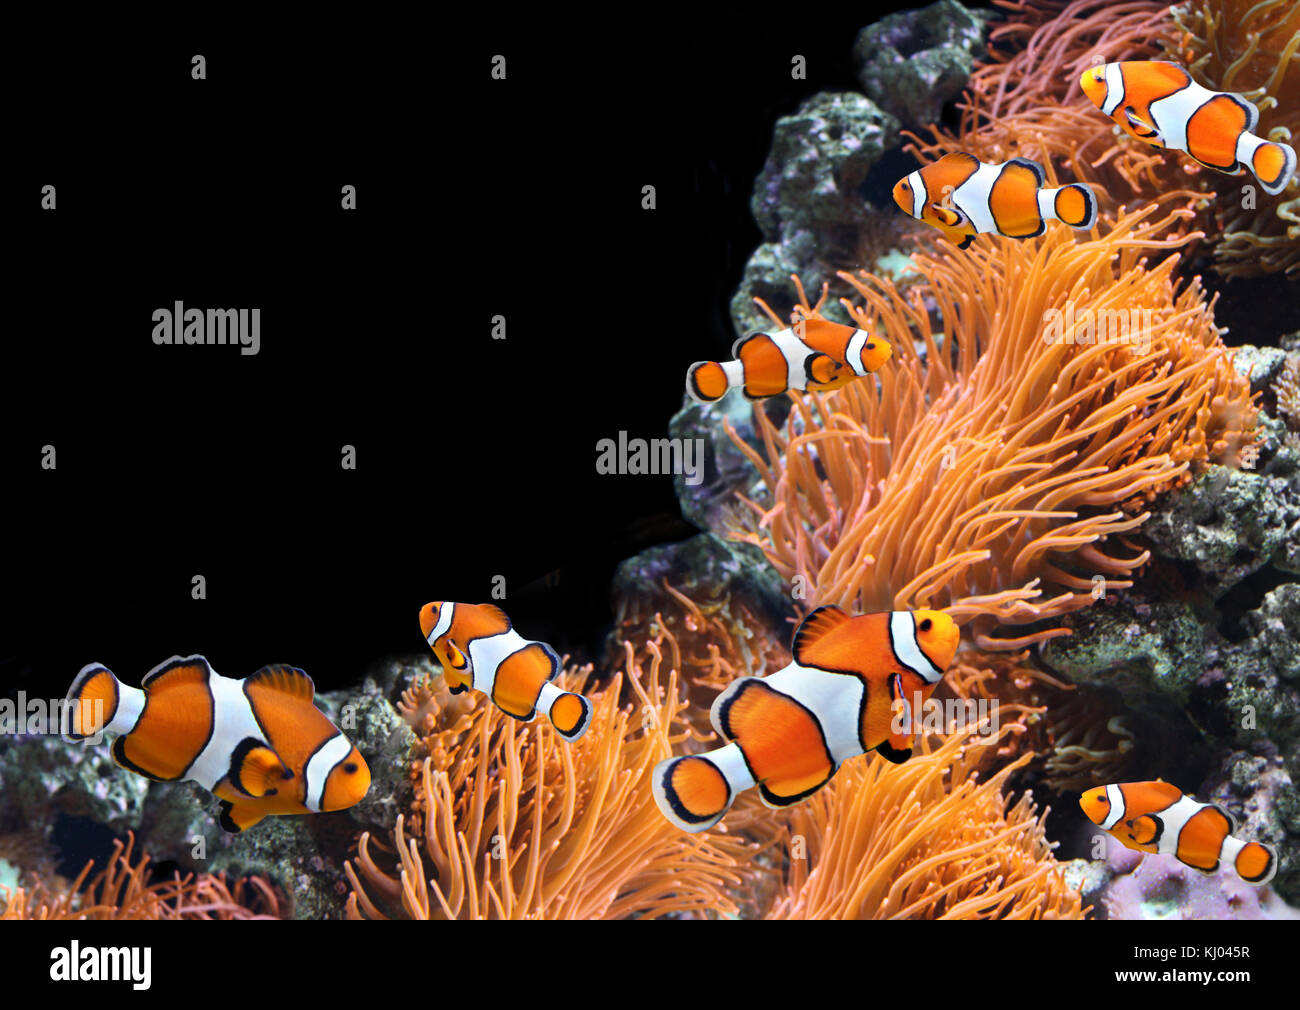 Sea anemone and clown fish in marine aquarium. Isolated on black background. Copy space for your text Stock Photo